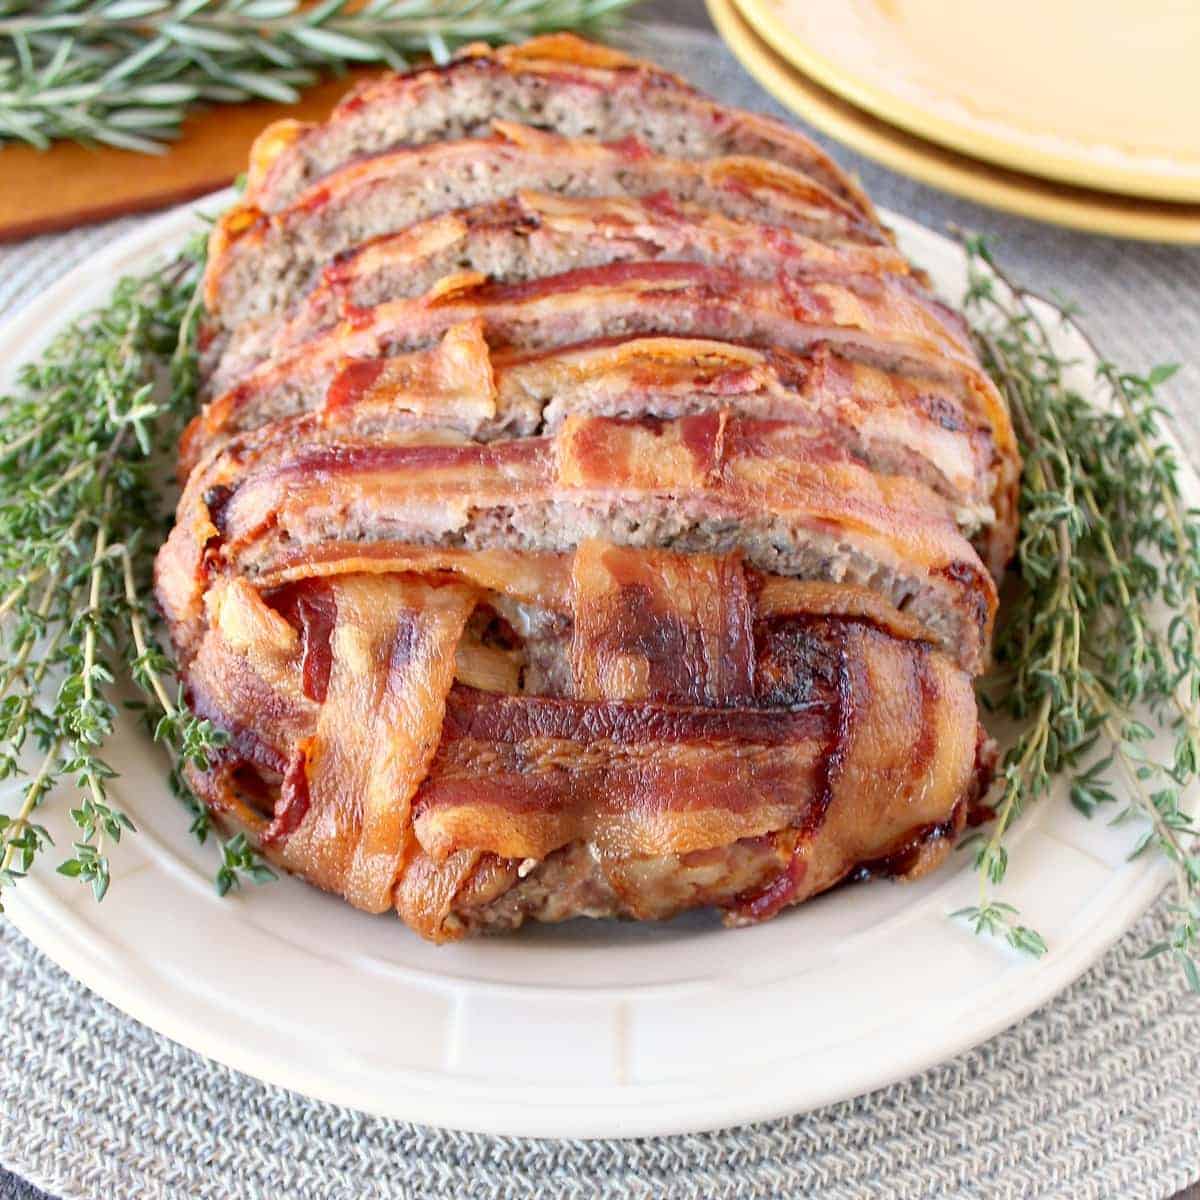 Bacon Wrapped Meatloaf Recipe: Steps, Tips, and Serving Ideas